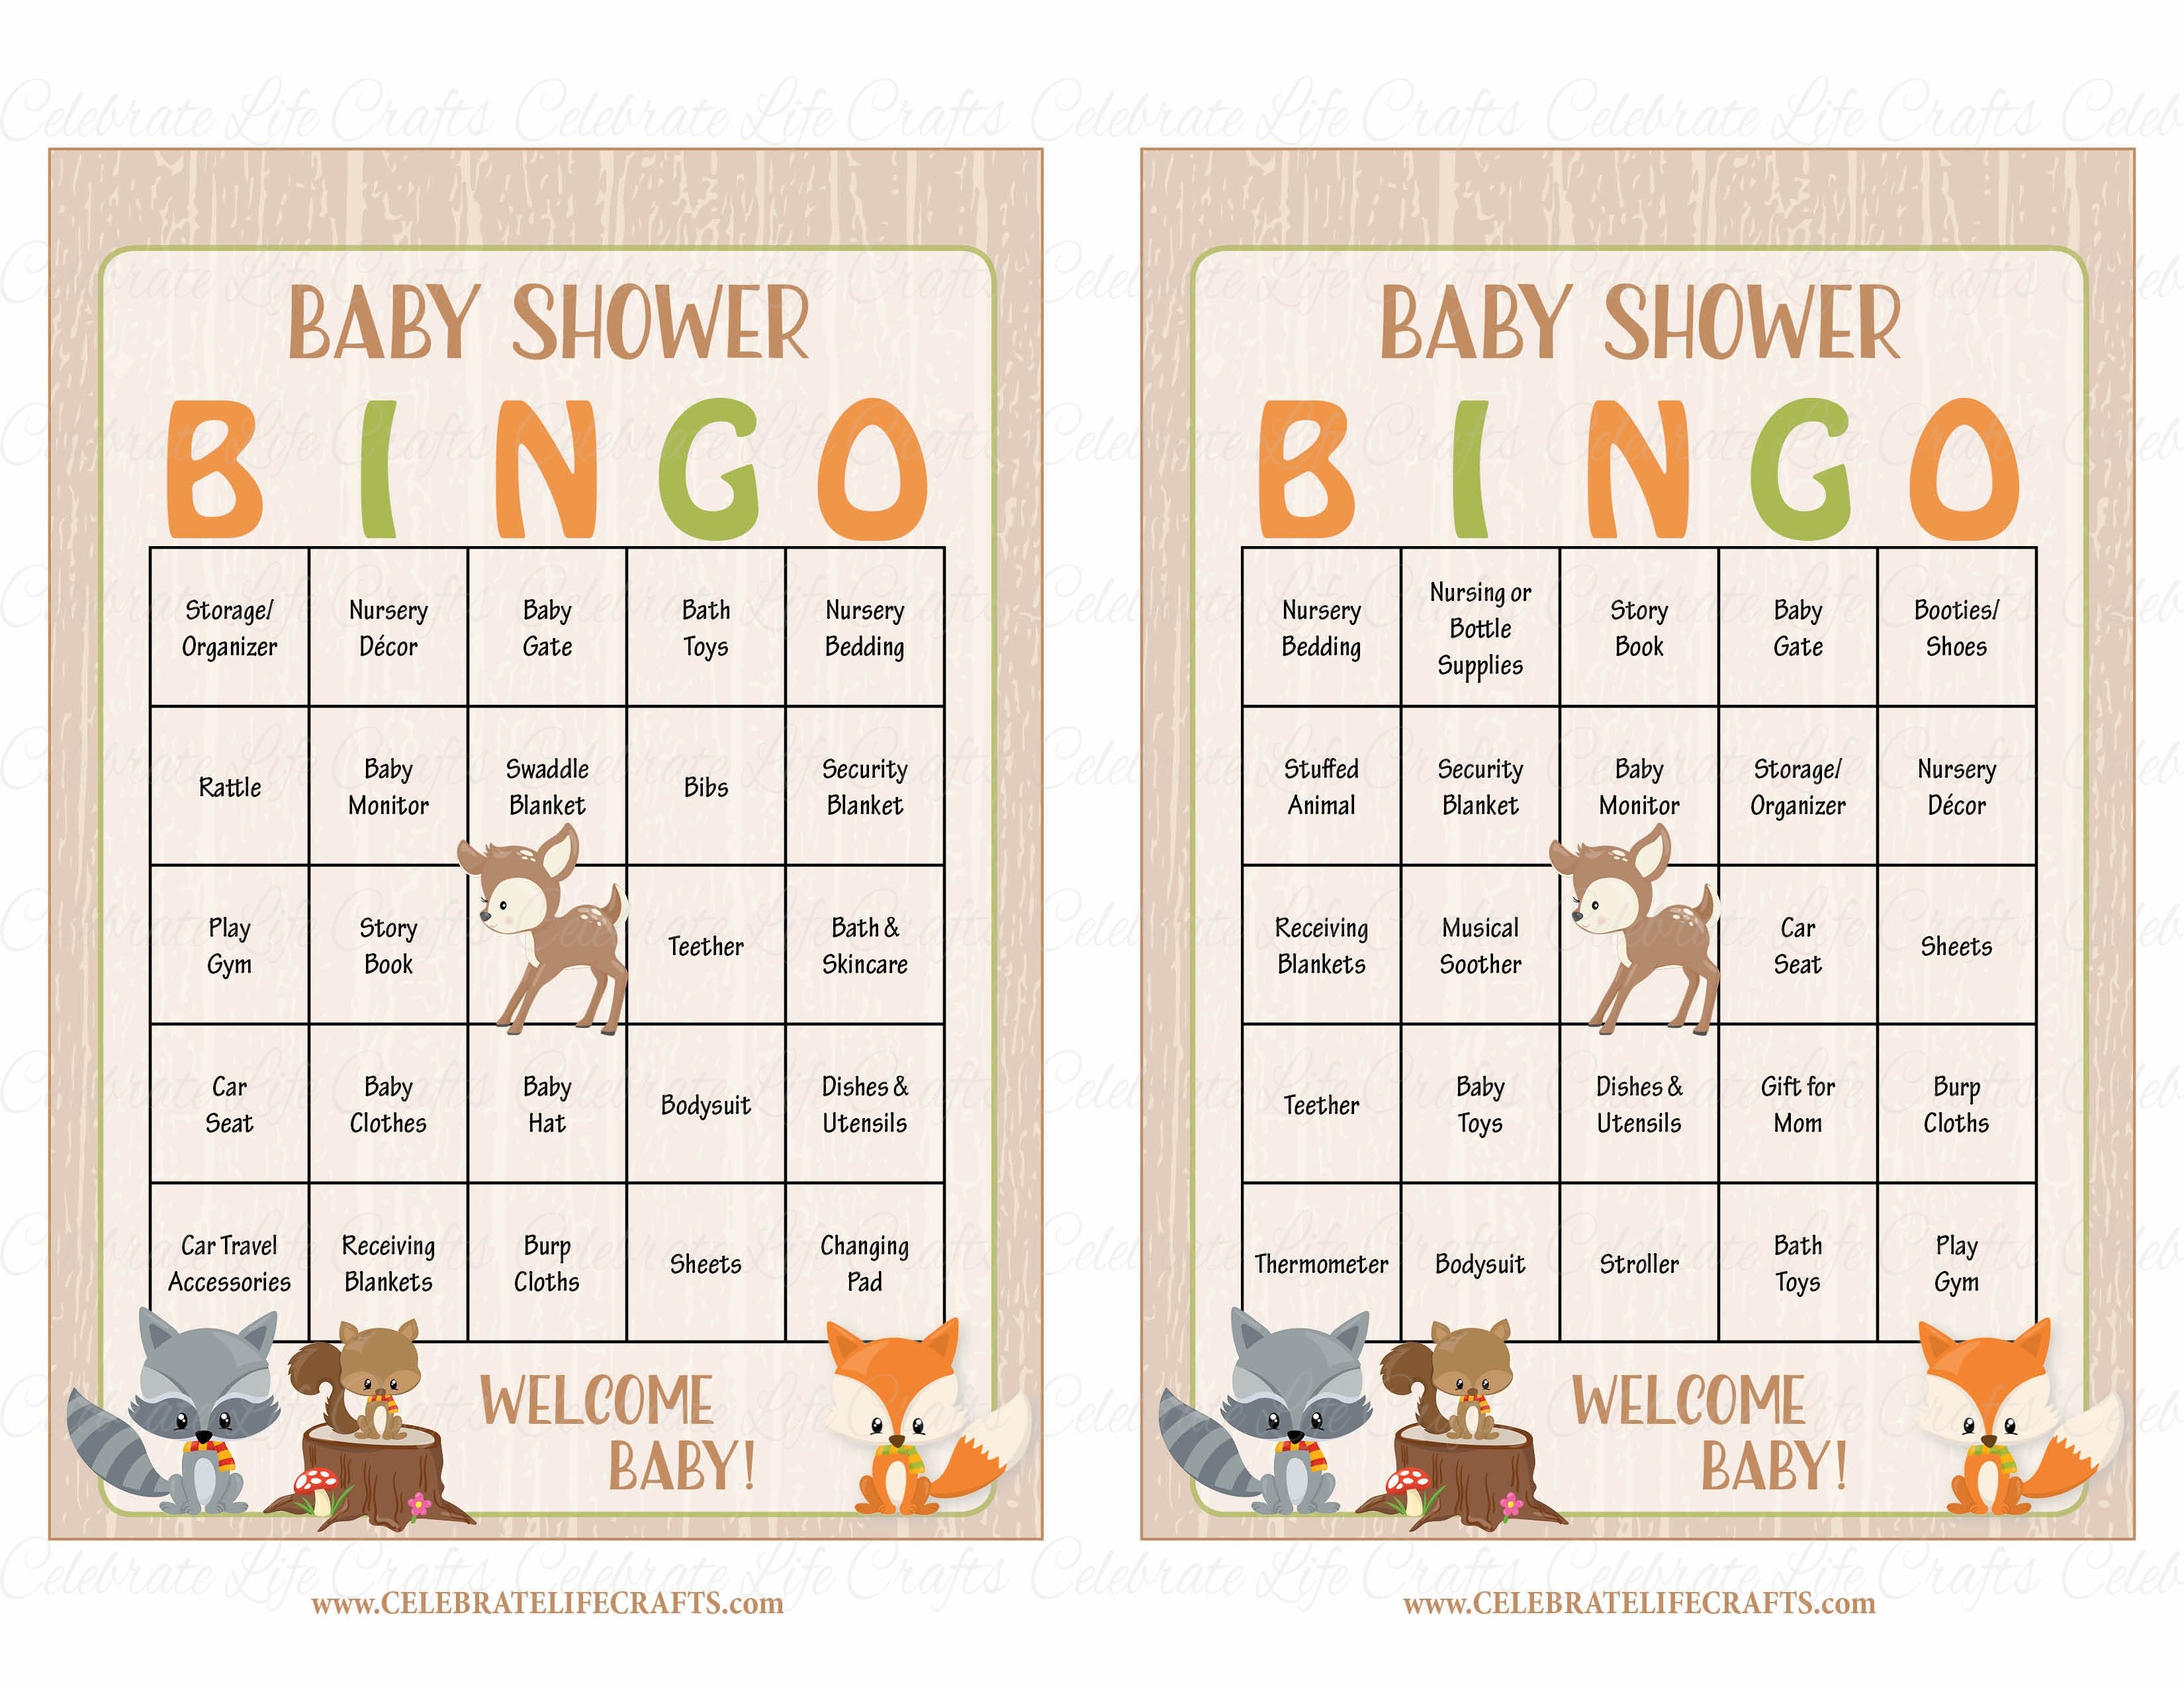 30 Printable Baby Shower Bingo Game Cards With Woodland Animals 30 Baby Shower Bingo Cards Forest Animals Instant Download W1 Party Games Party Favors Games Deshpandefoundationindia Org